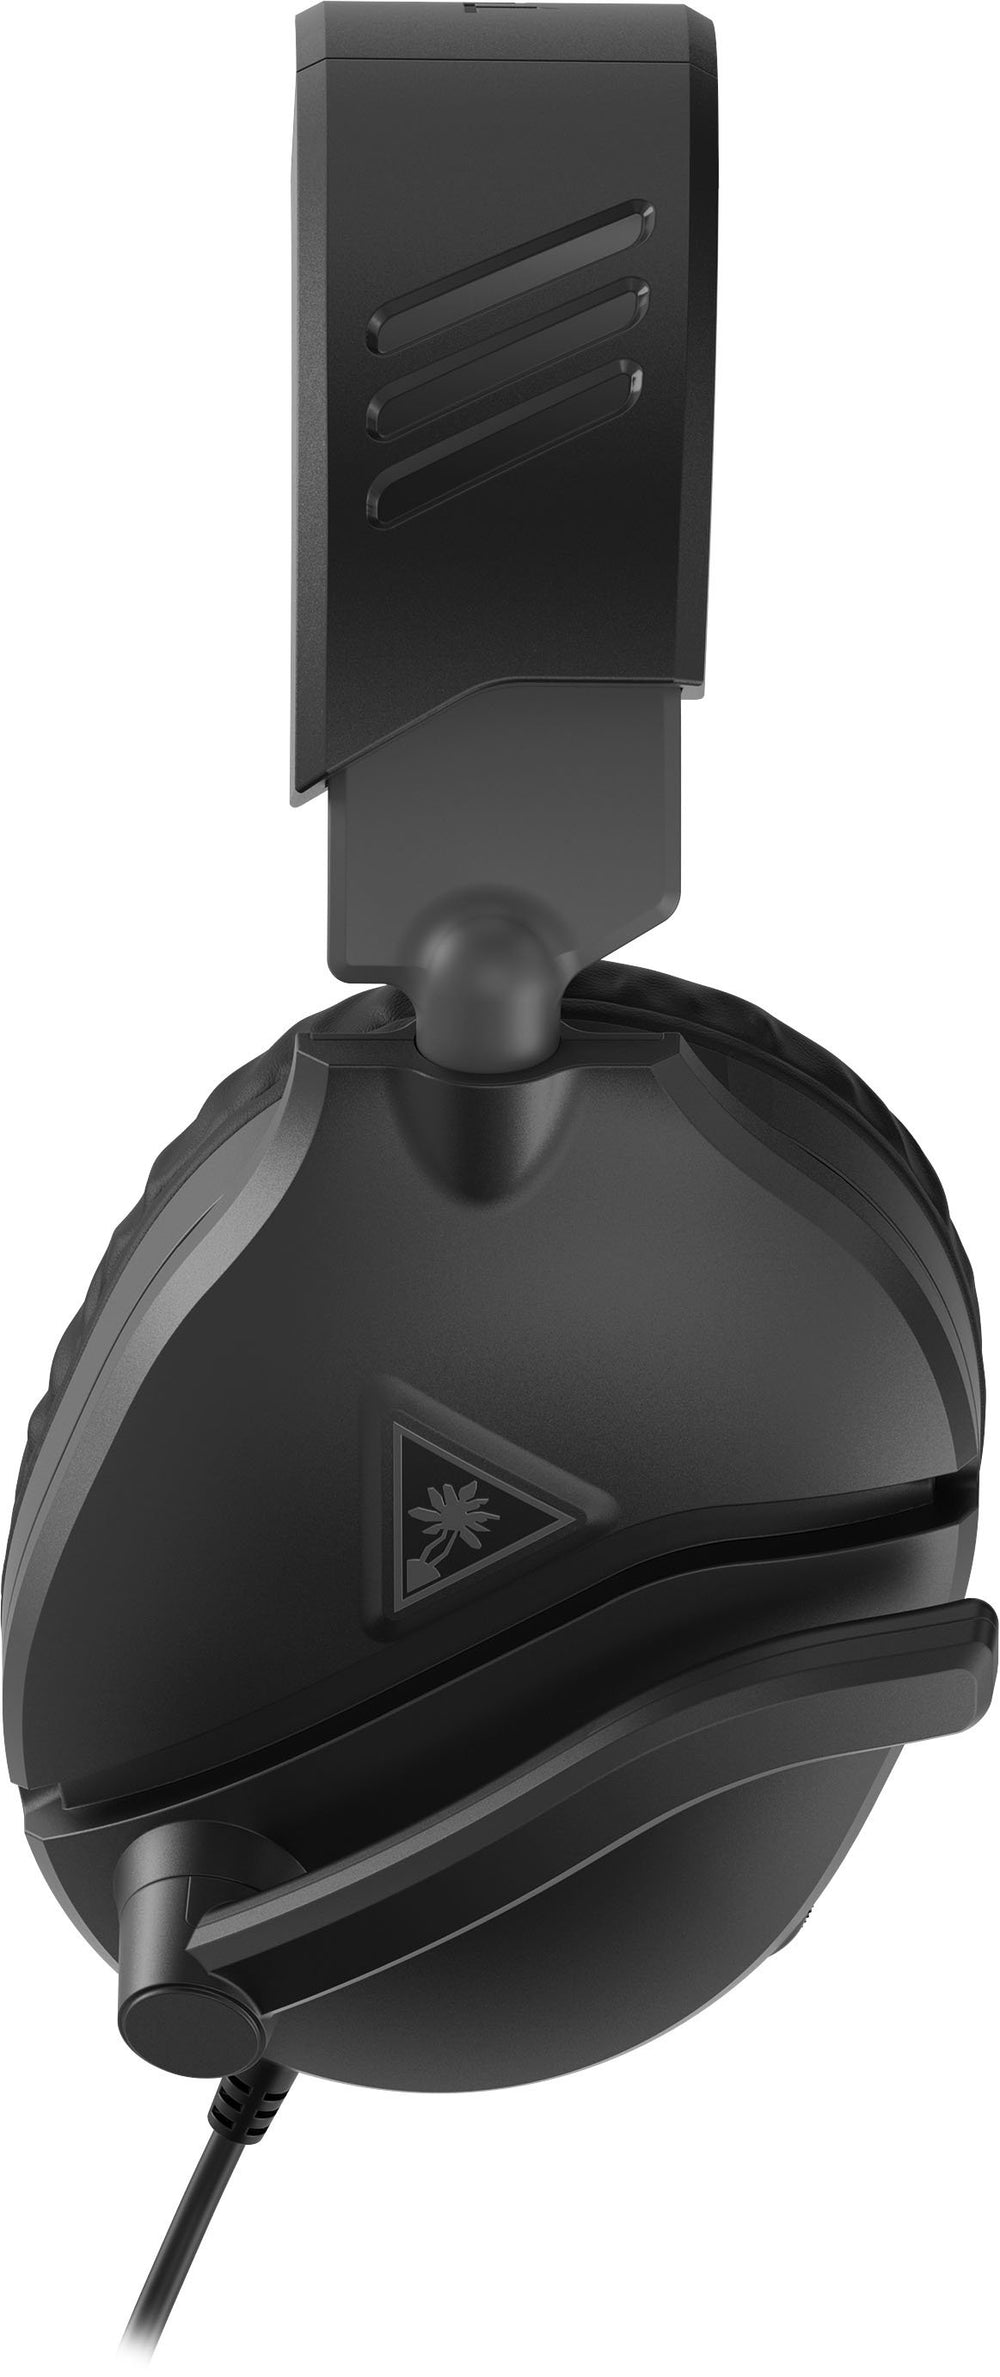 Turtle Beach - Recon 70 Multiplatform Wired Gaming Headset for PC, PS5, PS4, Xbox Series X|S, Xbox One, Nintendo Switch & Mobile - Black_1